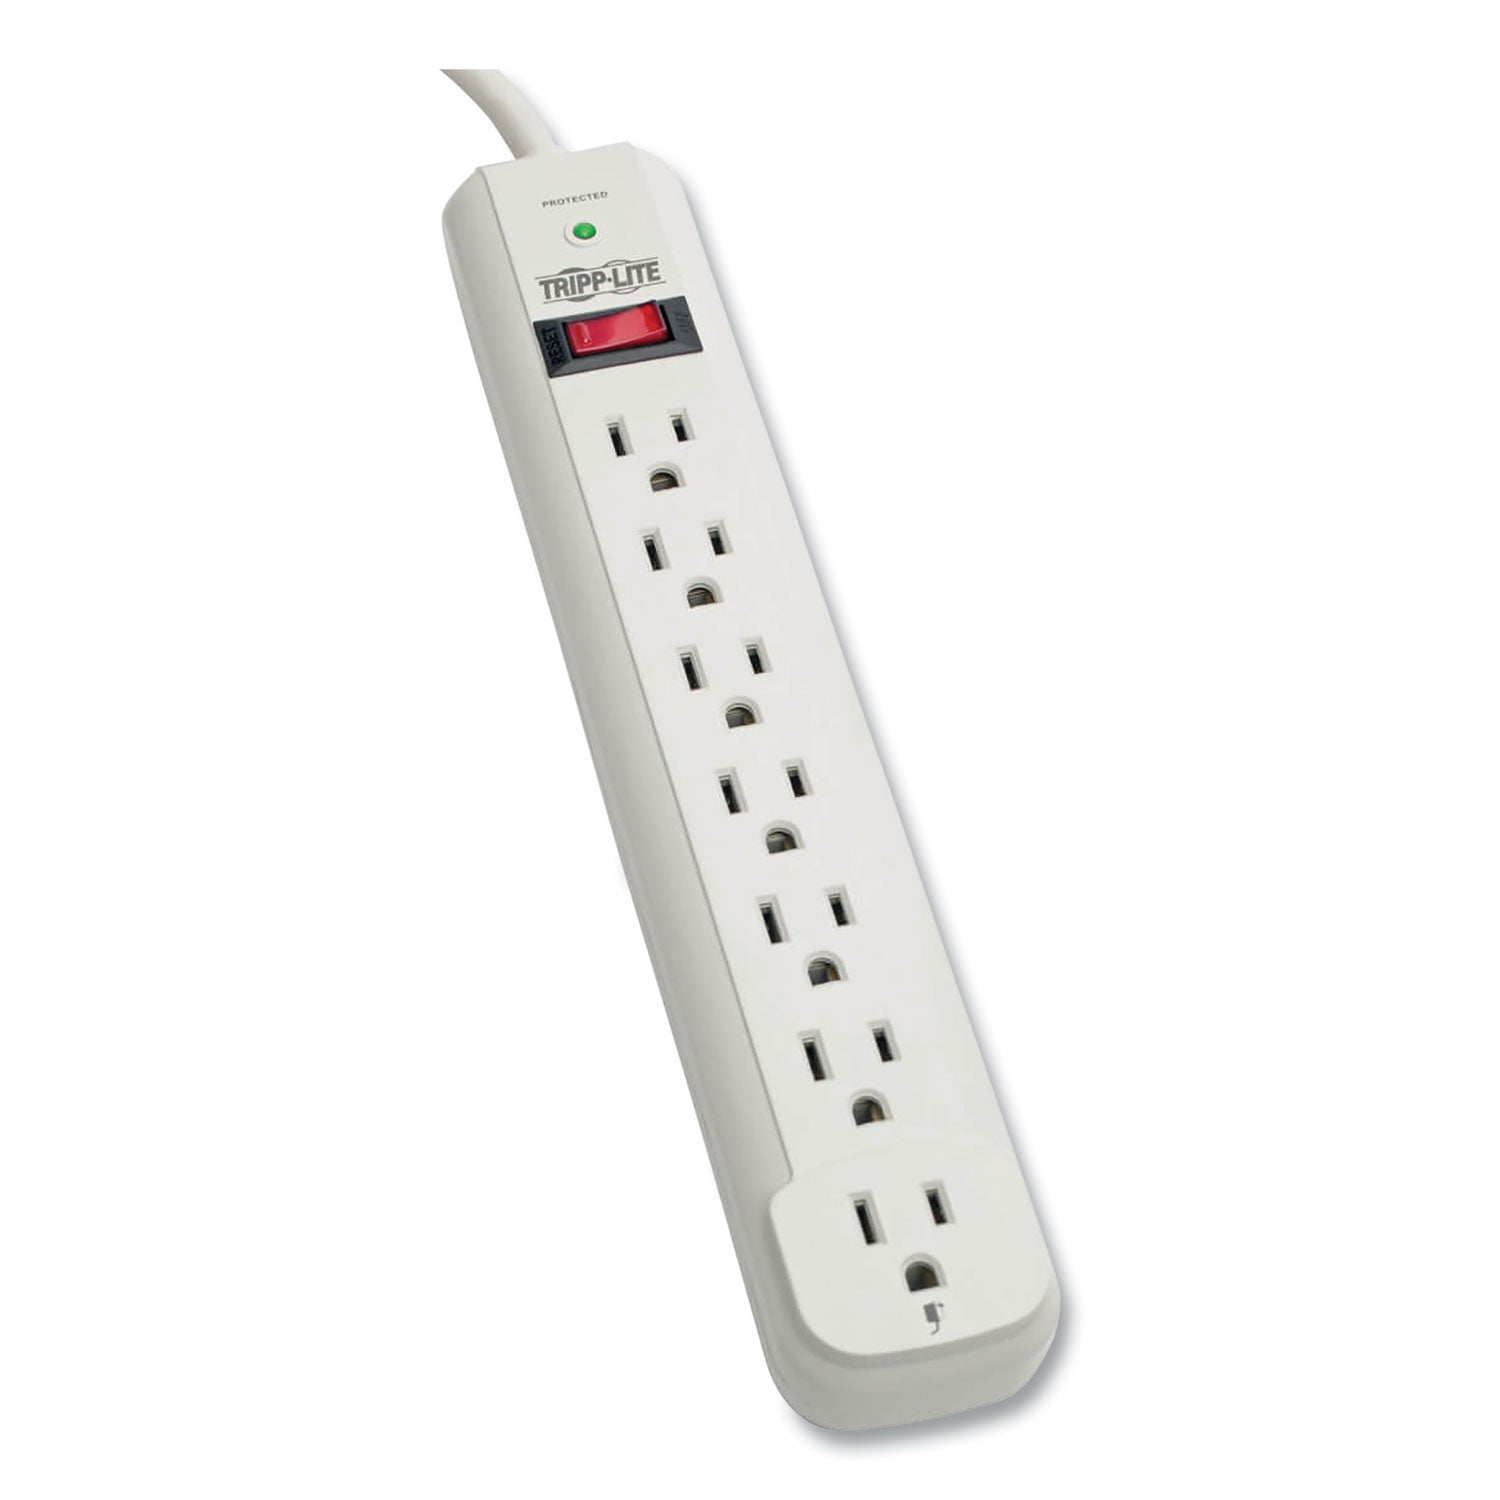 Protect It! Surge Protector, 7 AC Outlets, 6 ft Cord, 1,080 J, Light Gray - 